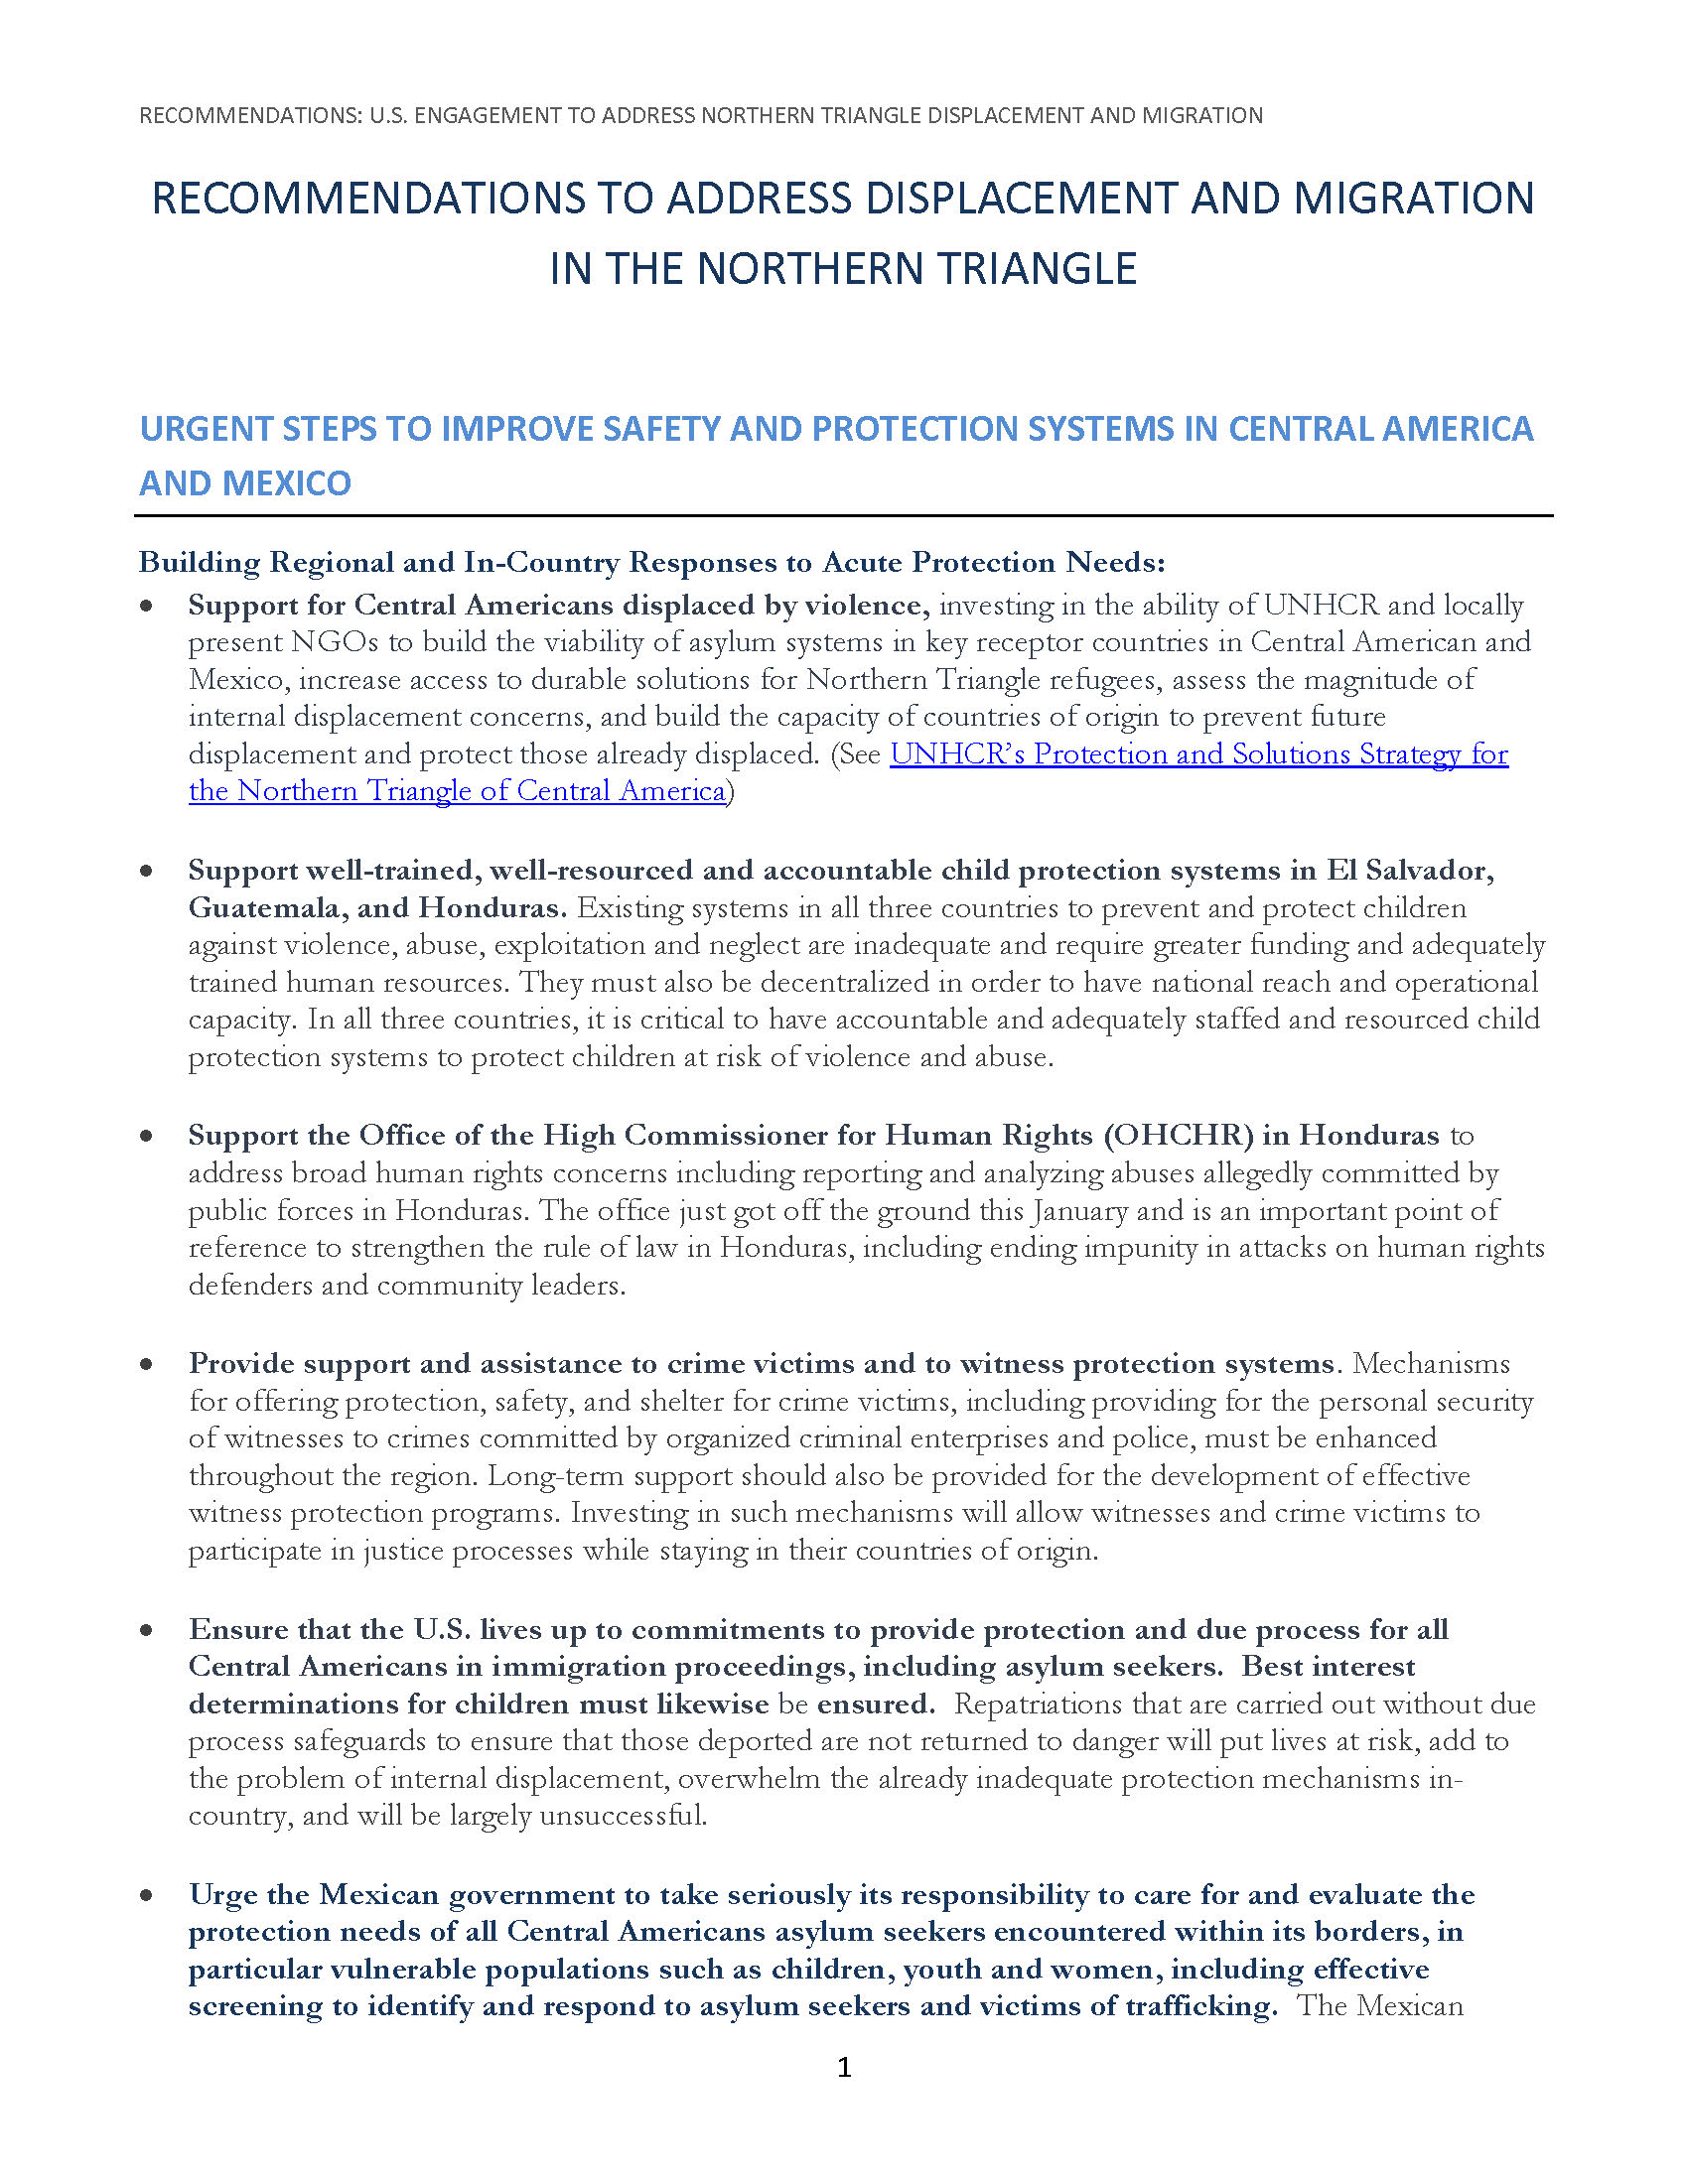 2016 – Recommendations -U S  Engagement to Address Northern Triangle Displacement and Migration FINAL – 2/ 23/16